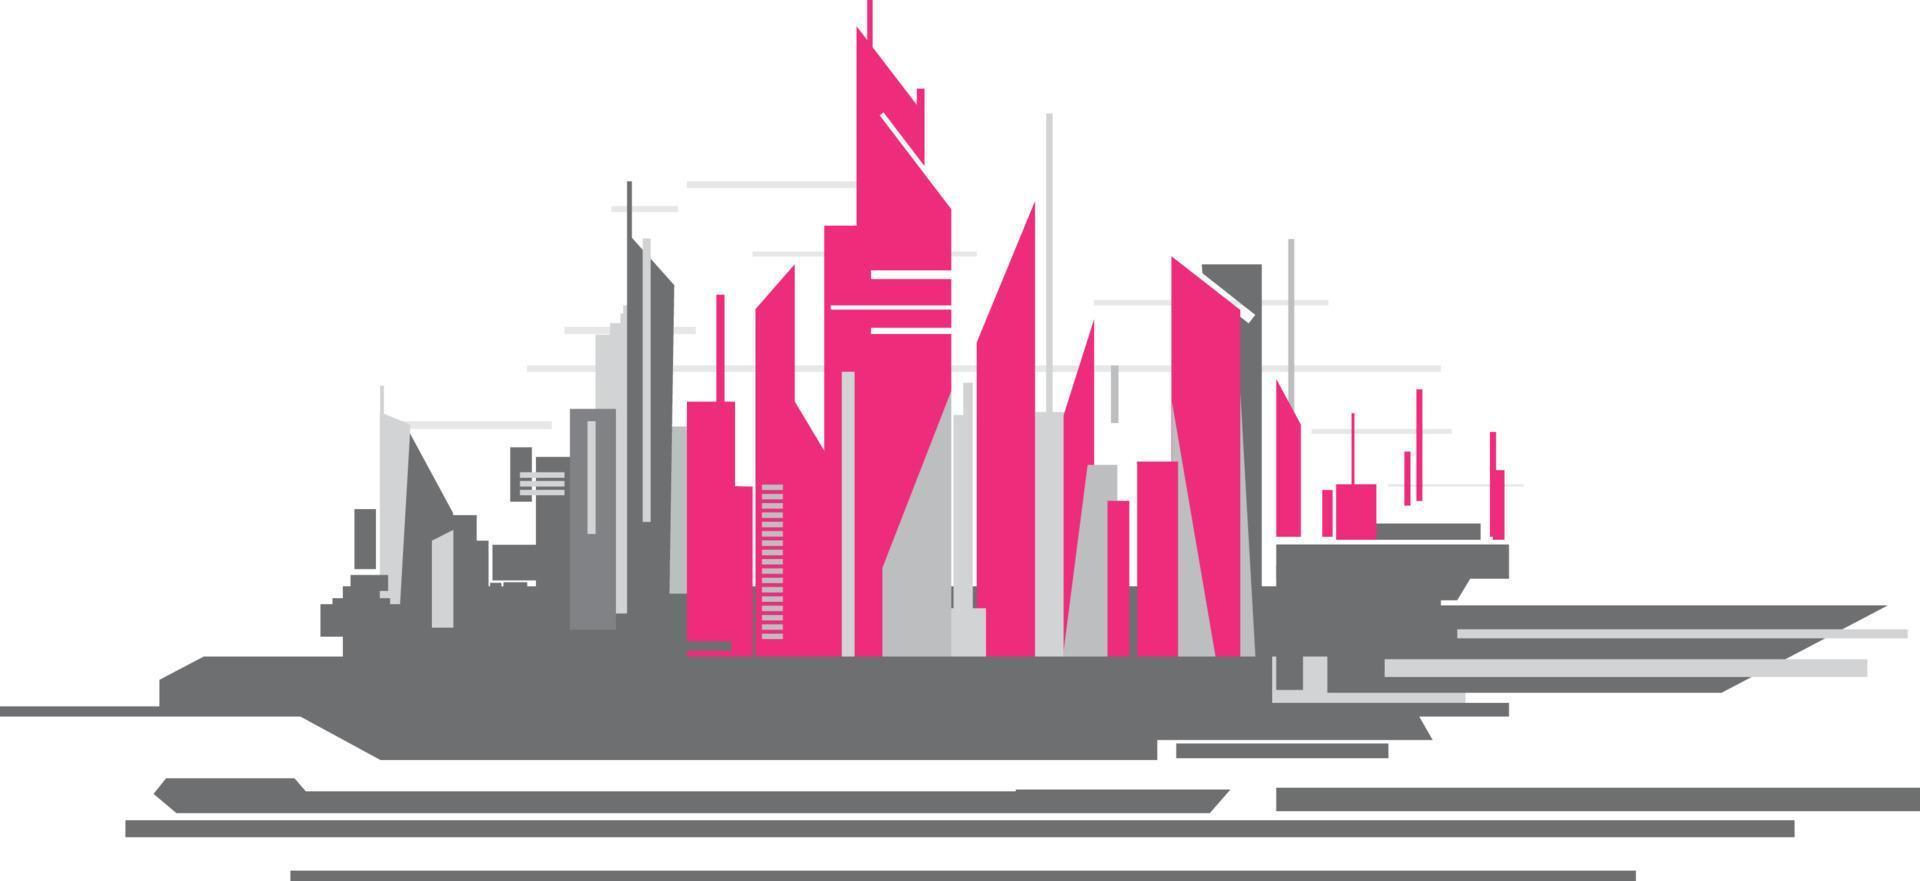 Cityscape, Building perspective, Modern building in the city skyline, city silhouette, city skyscrapers, Business center vector